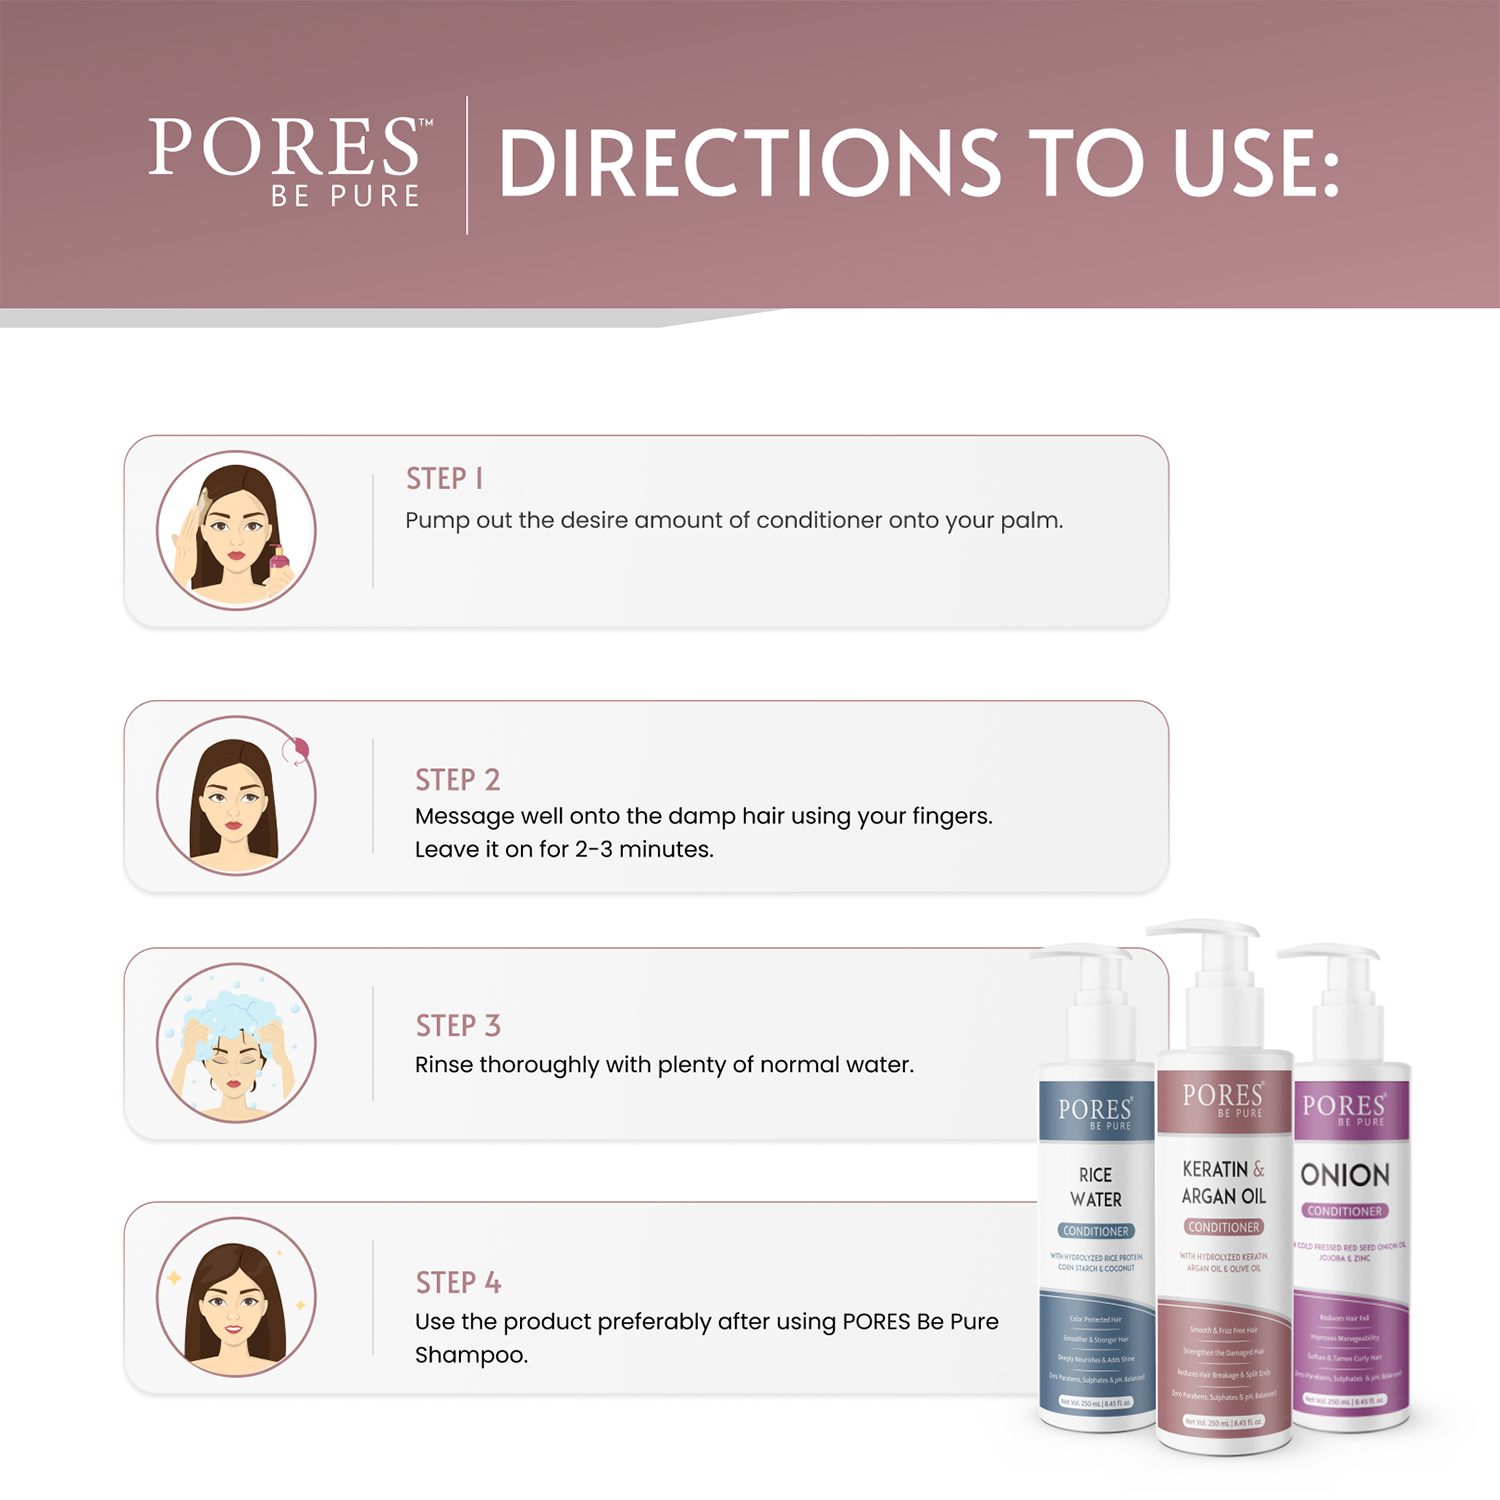 Directions to use Keratin & Argan Oil Conditioner by PORES BE PURE